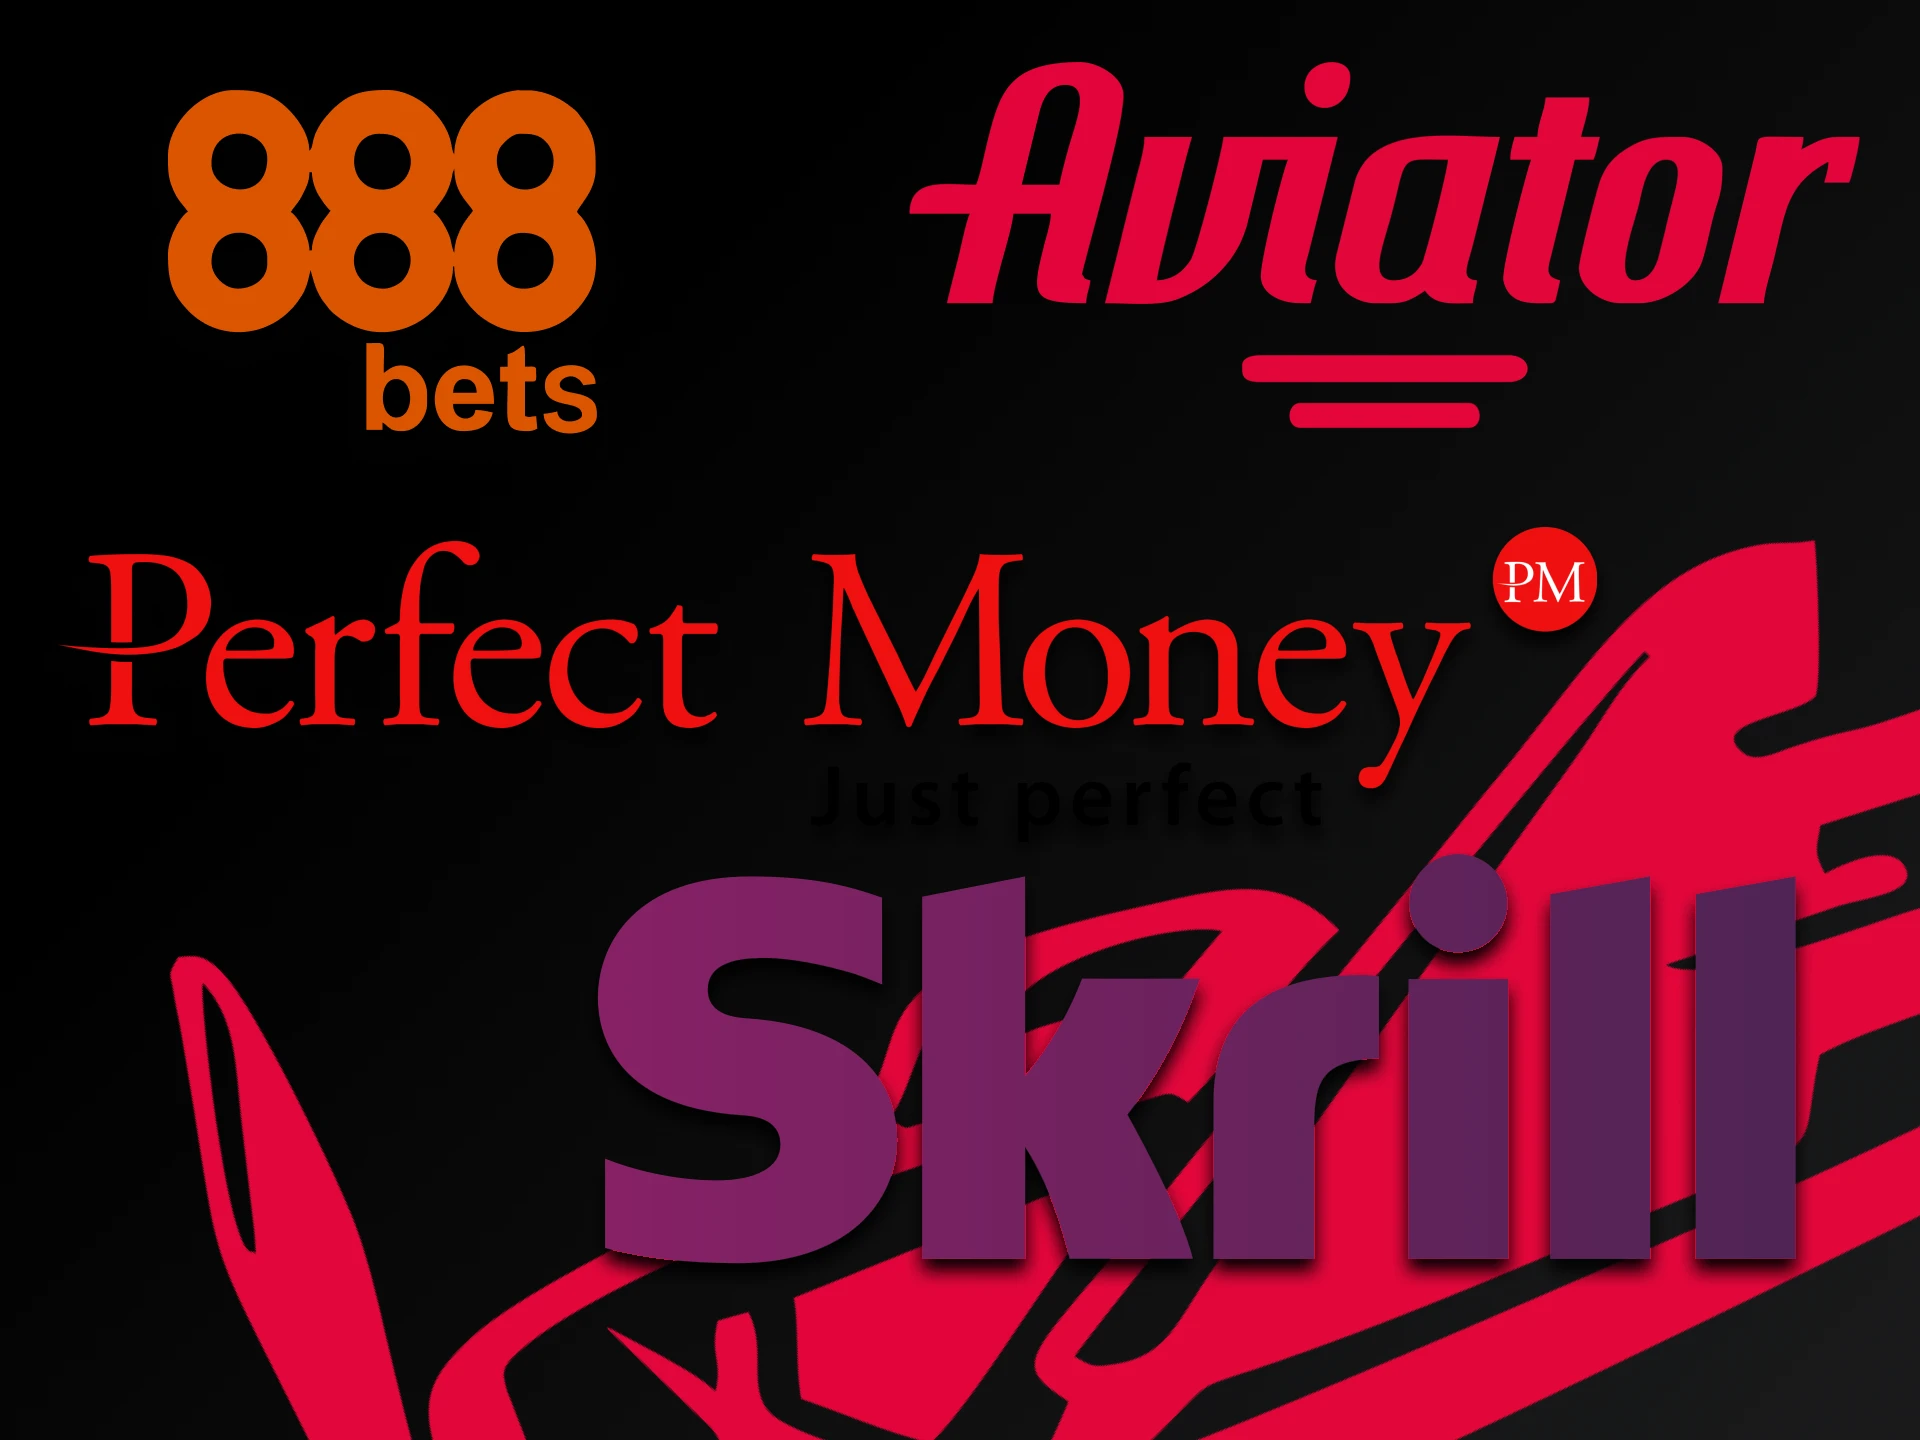 We will tell you how you can withdraw your funds from 888bet for the Aviator game.